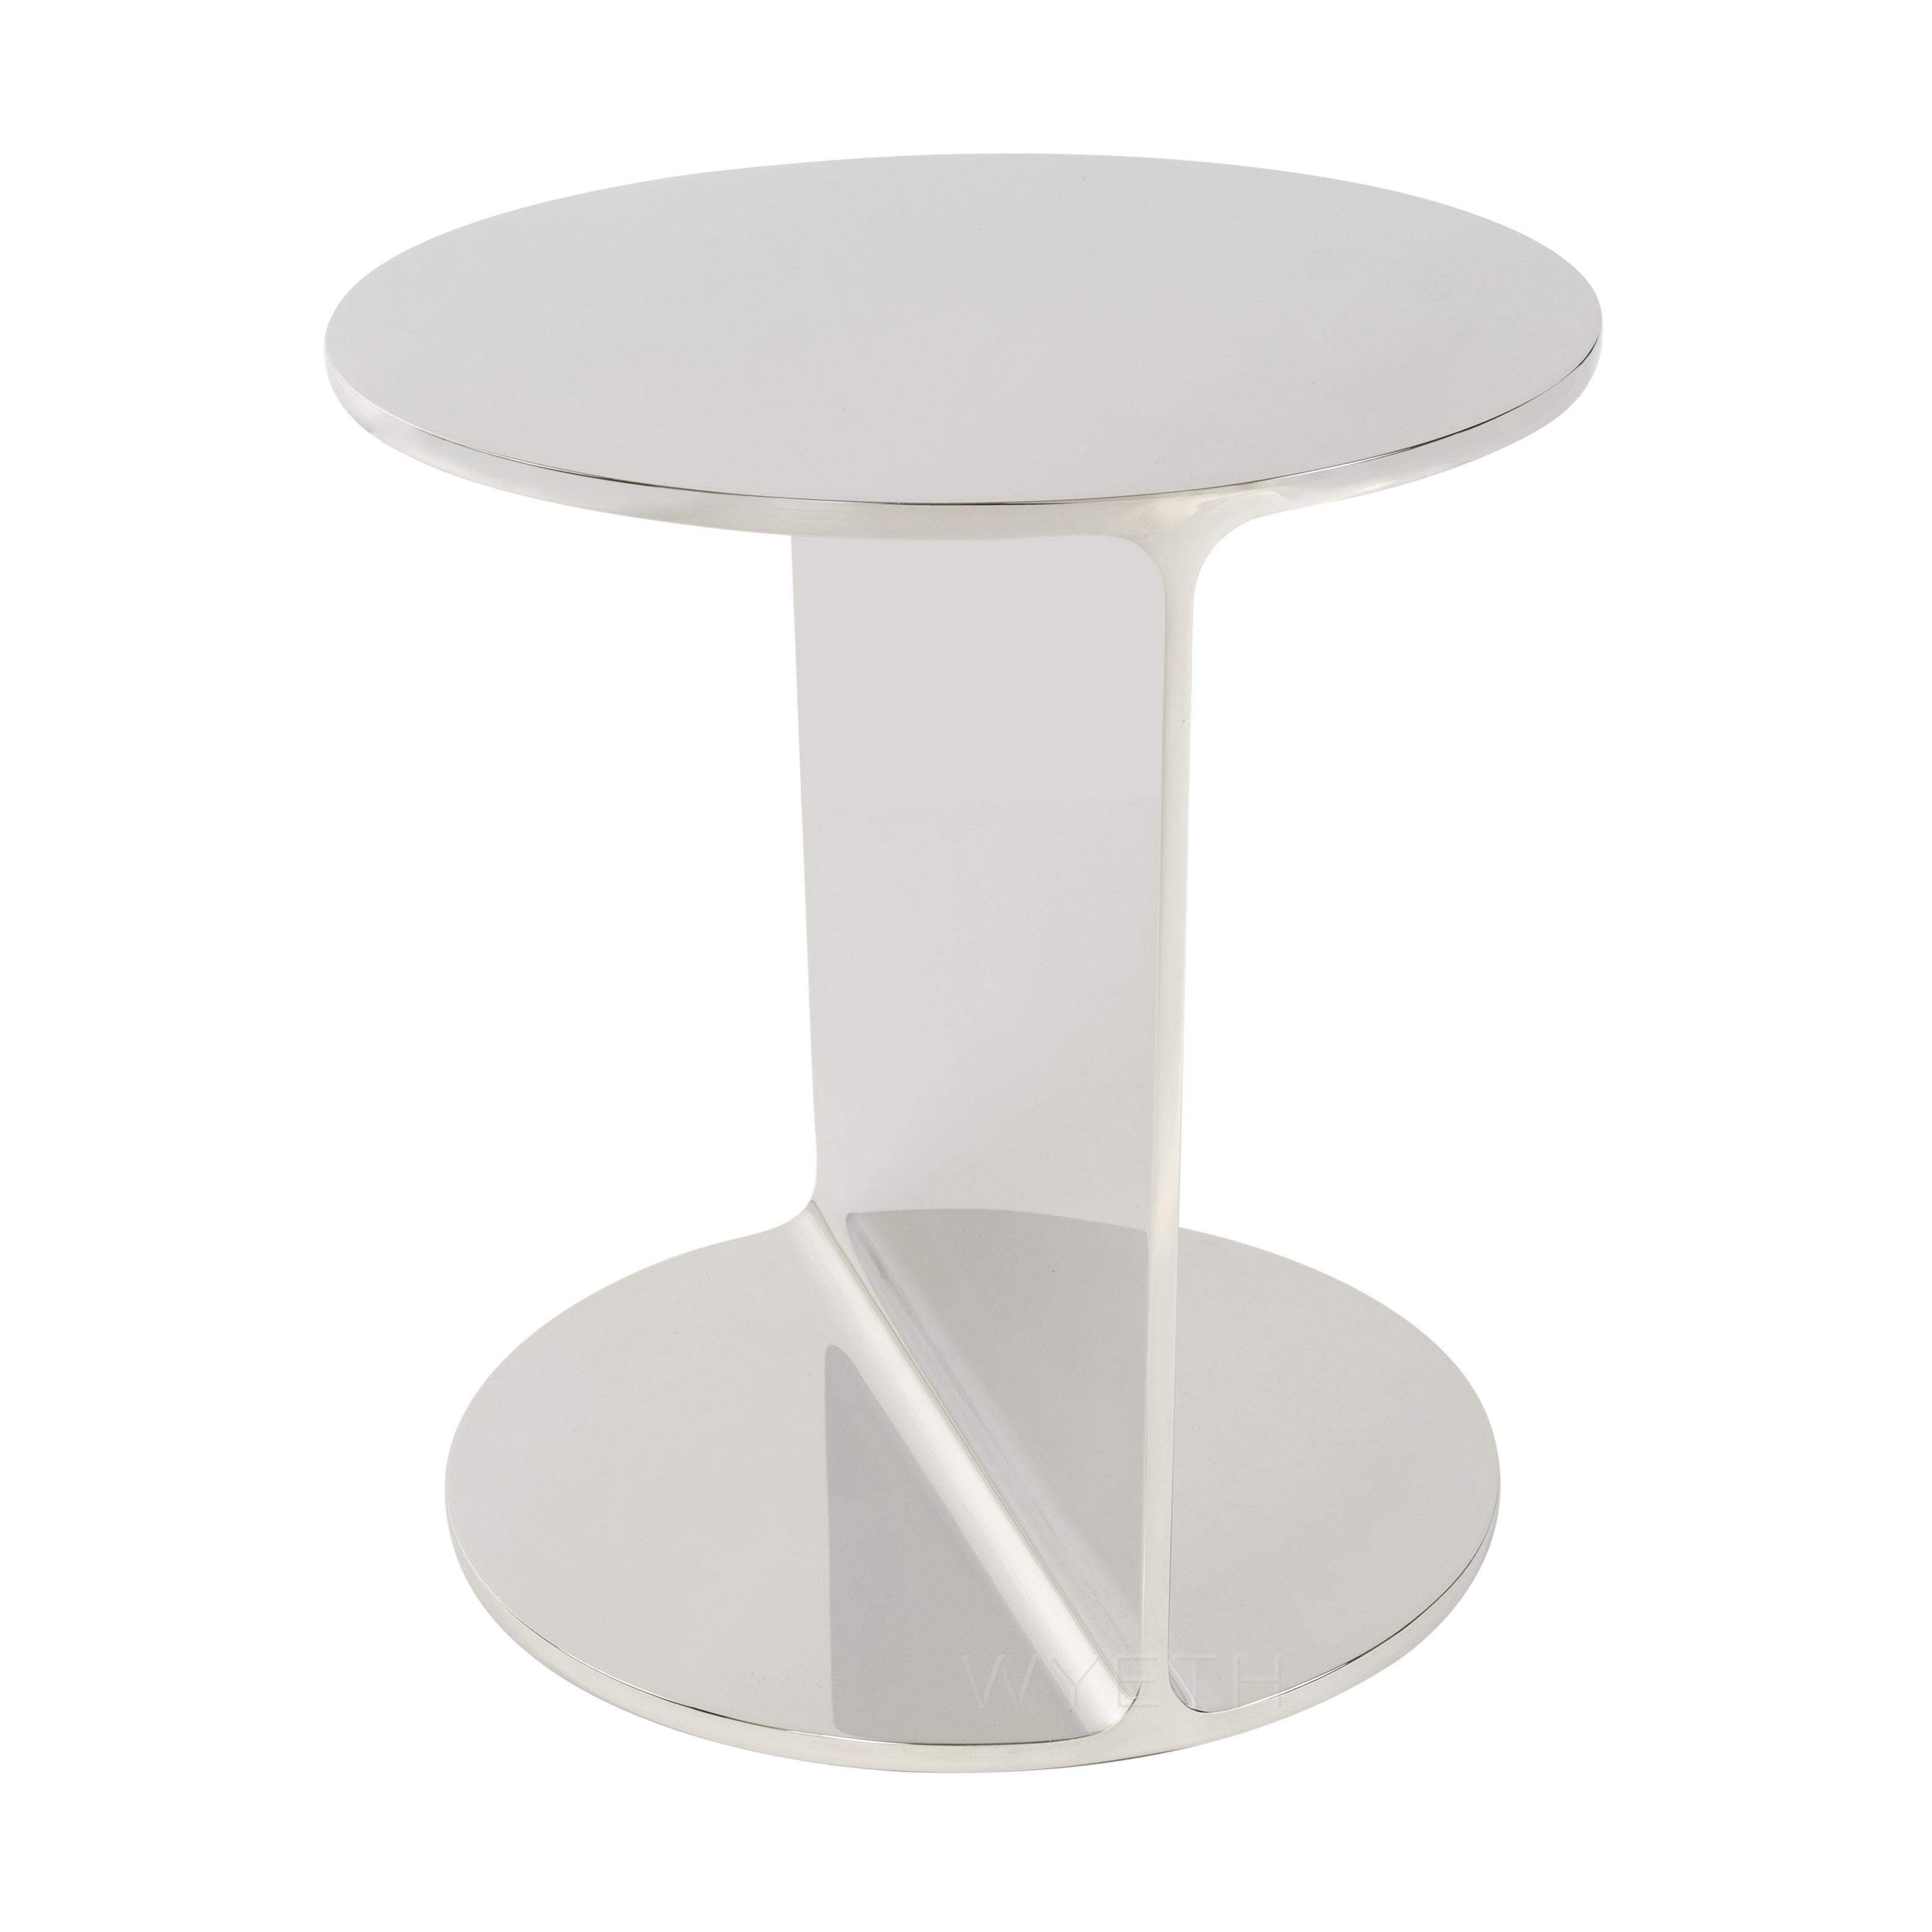 A Wyeth Original side or end table, handcrafted in solid polished stainless steel. Produced by the Wyeth workshop in NYC.